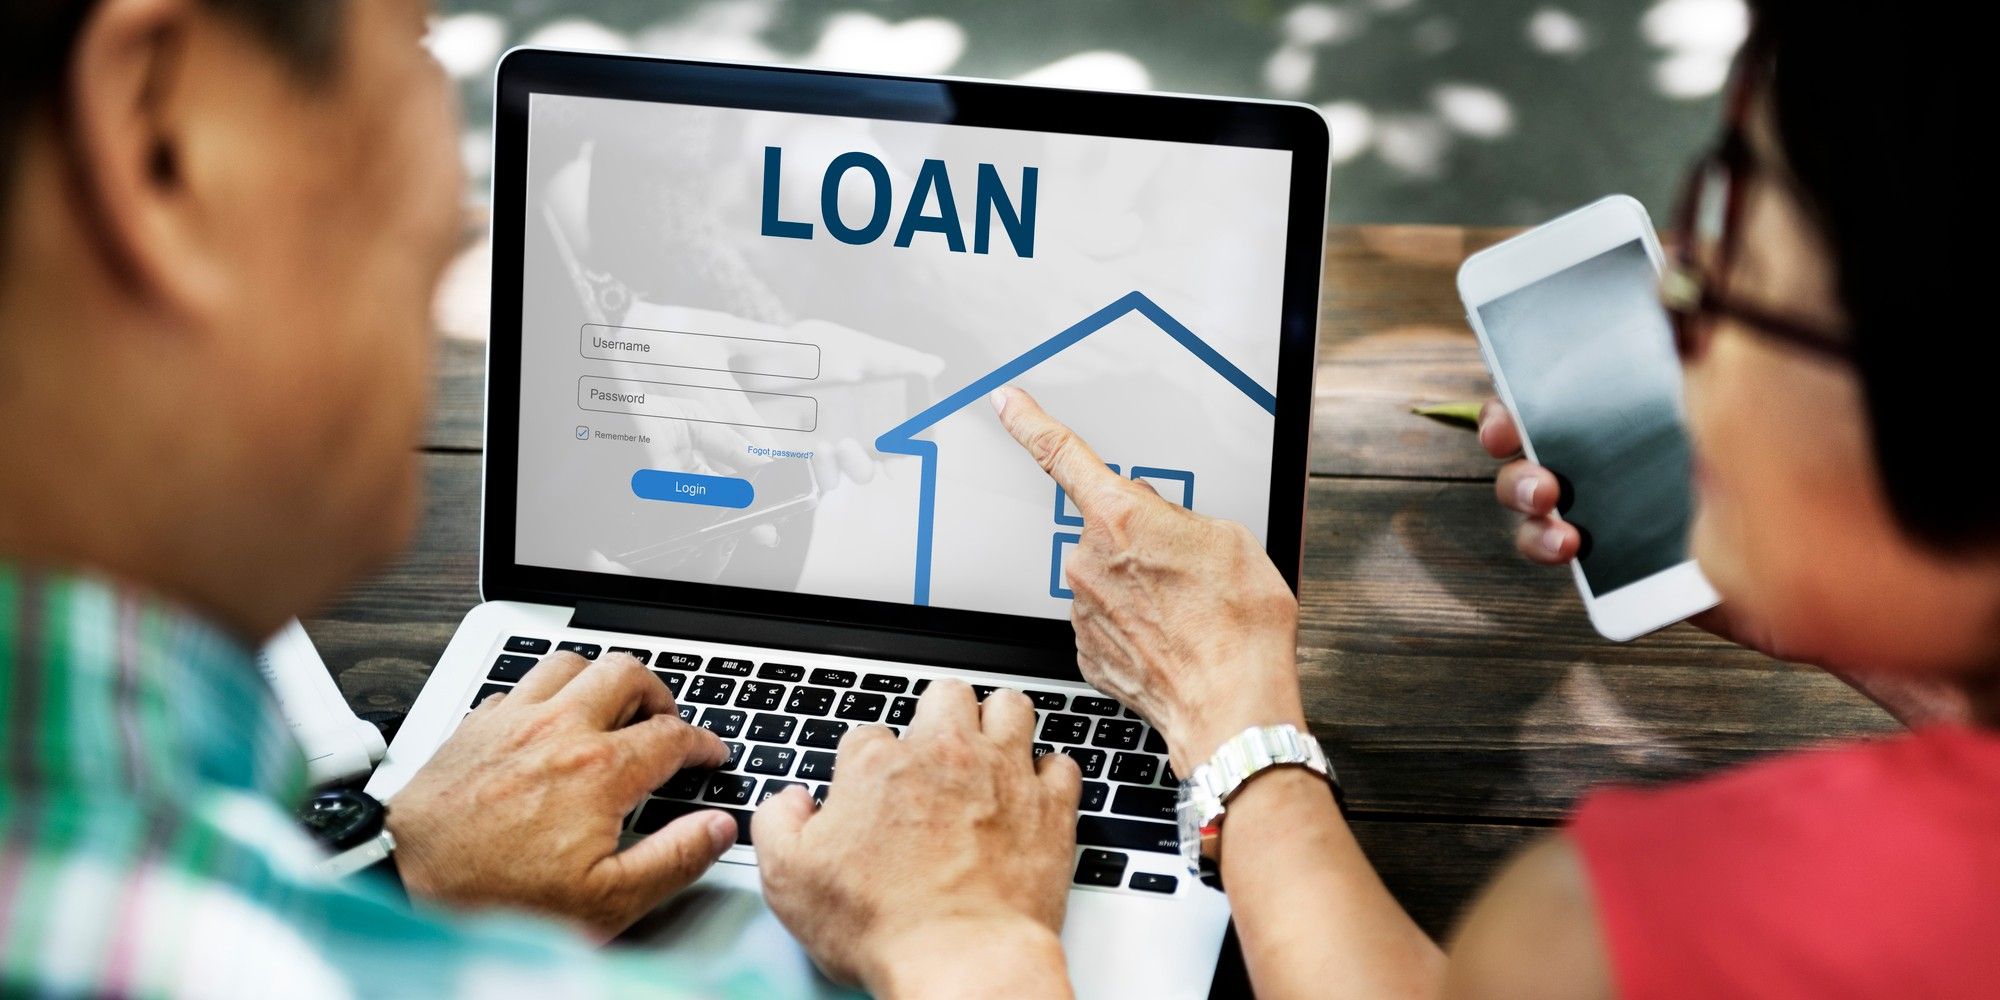 American Web Loan has agreed to resolve claims that the online lender violated interest rate laws.